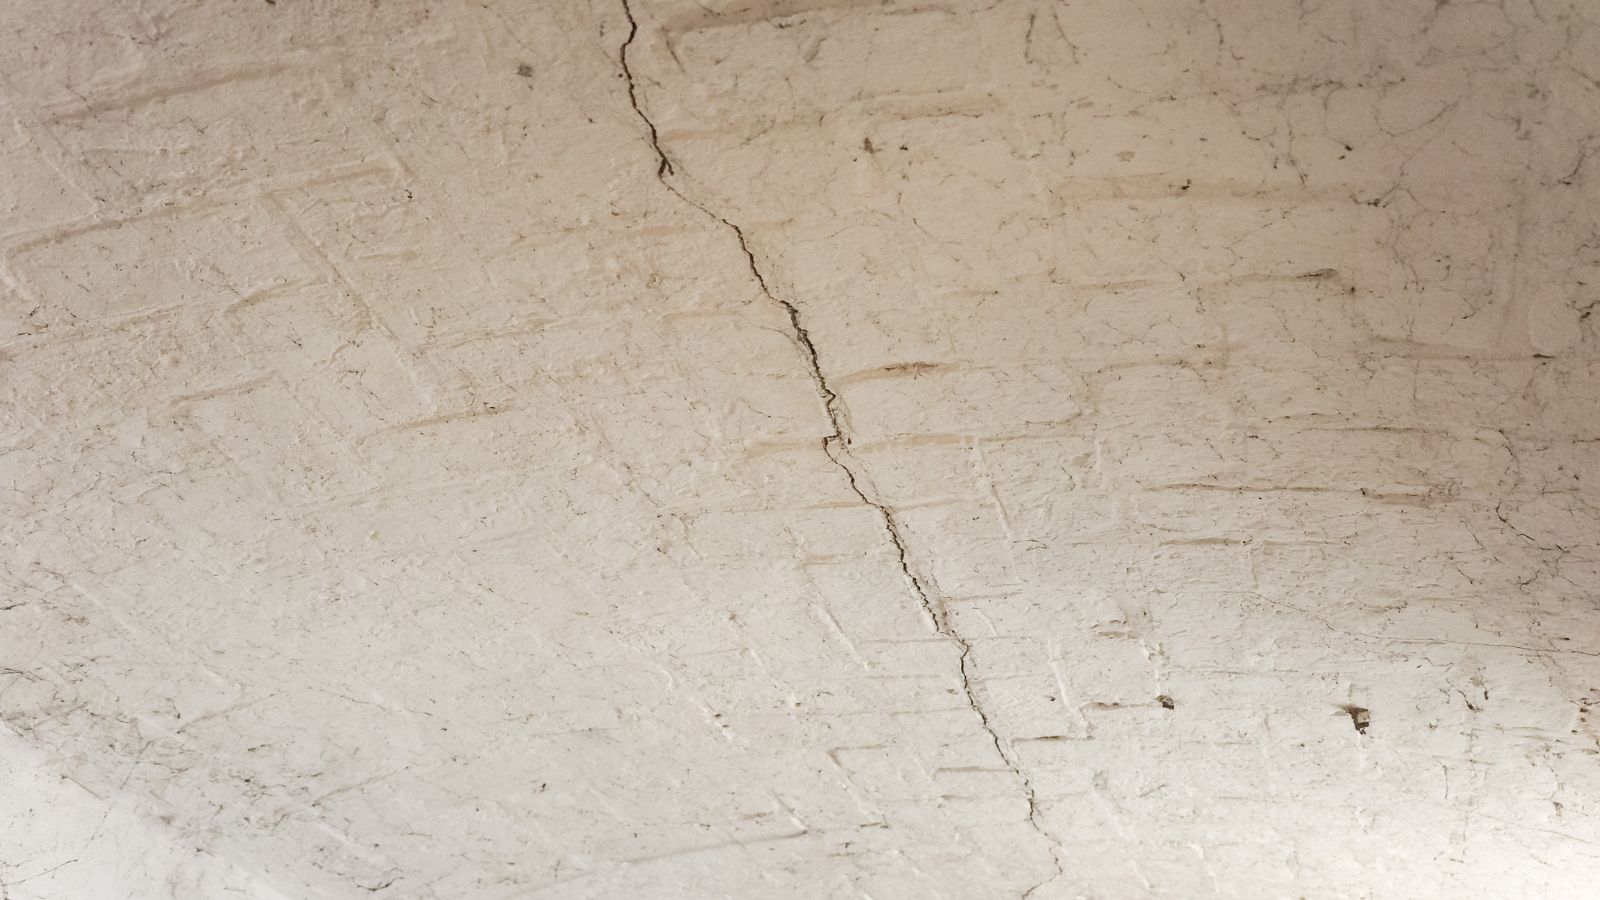 Common Causes of Ceiling Cracks